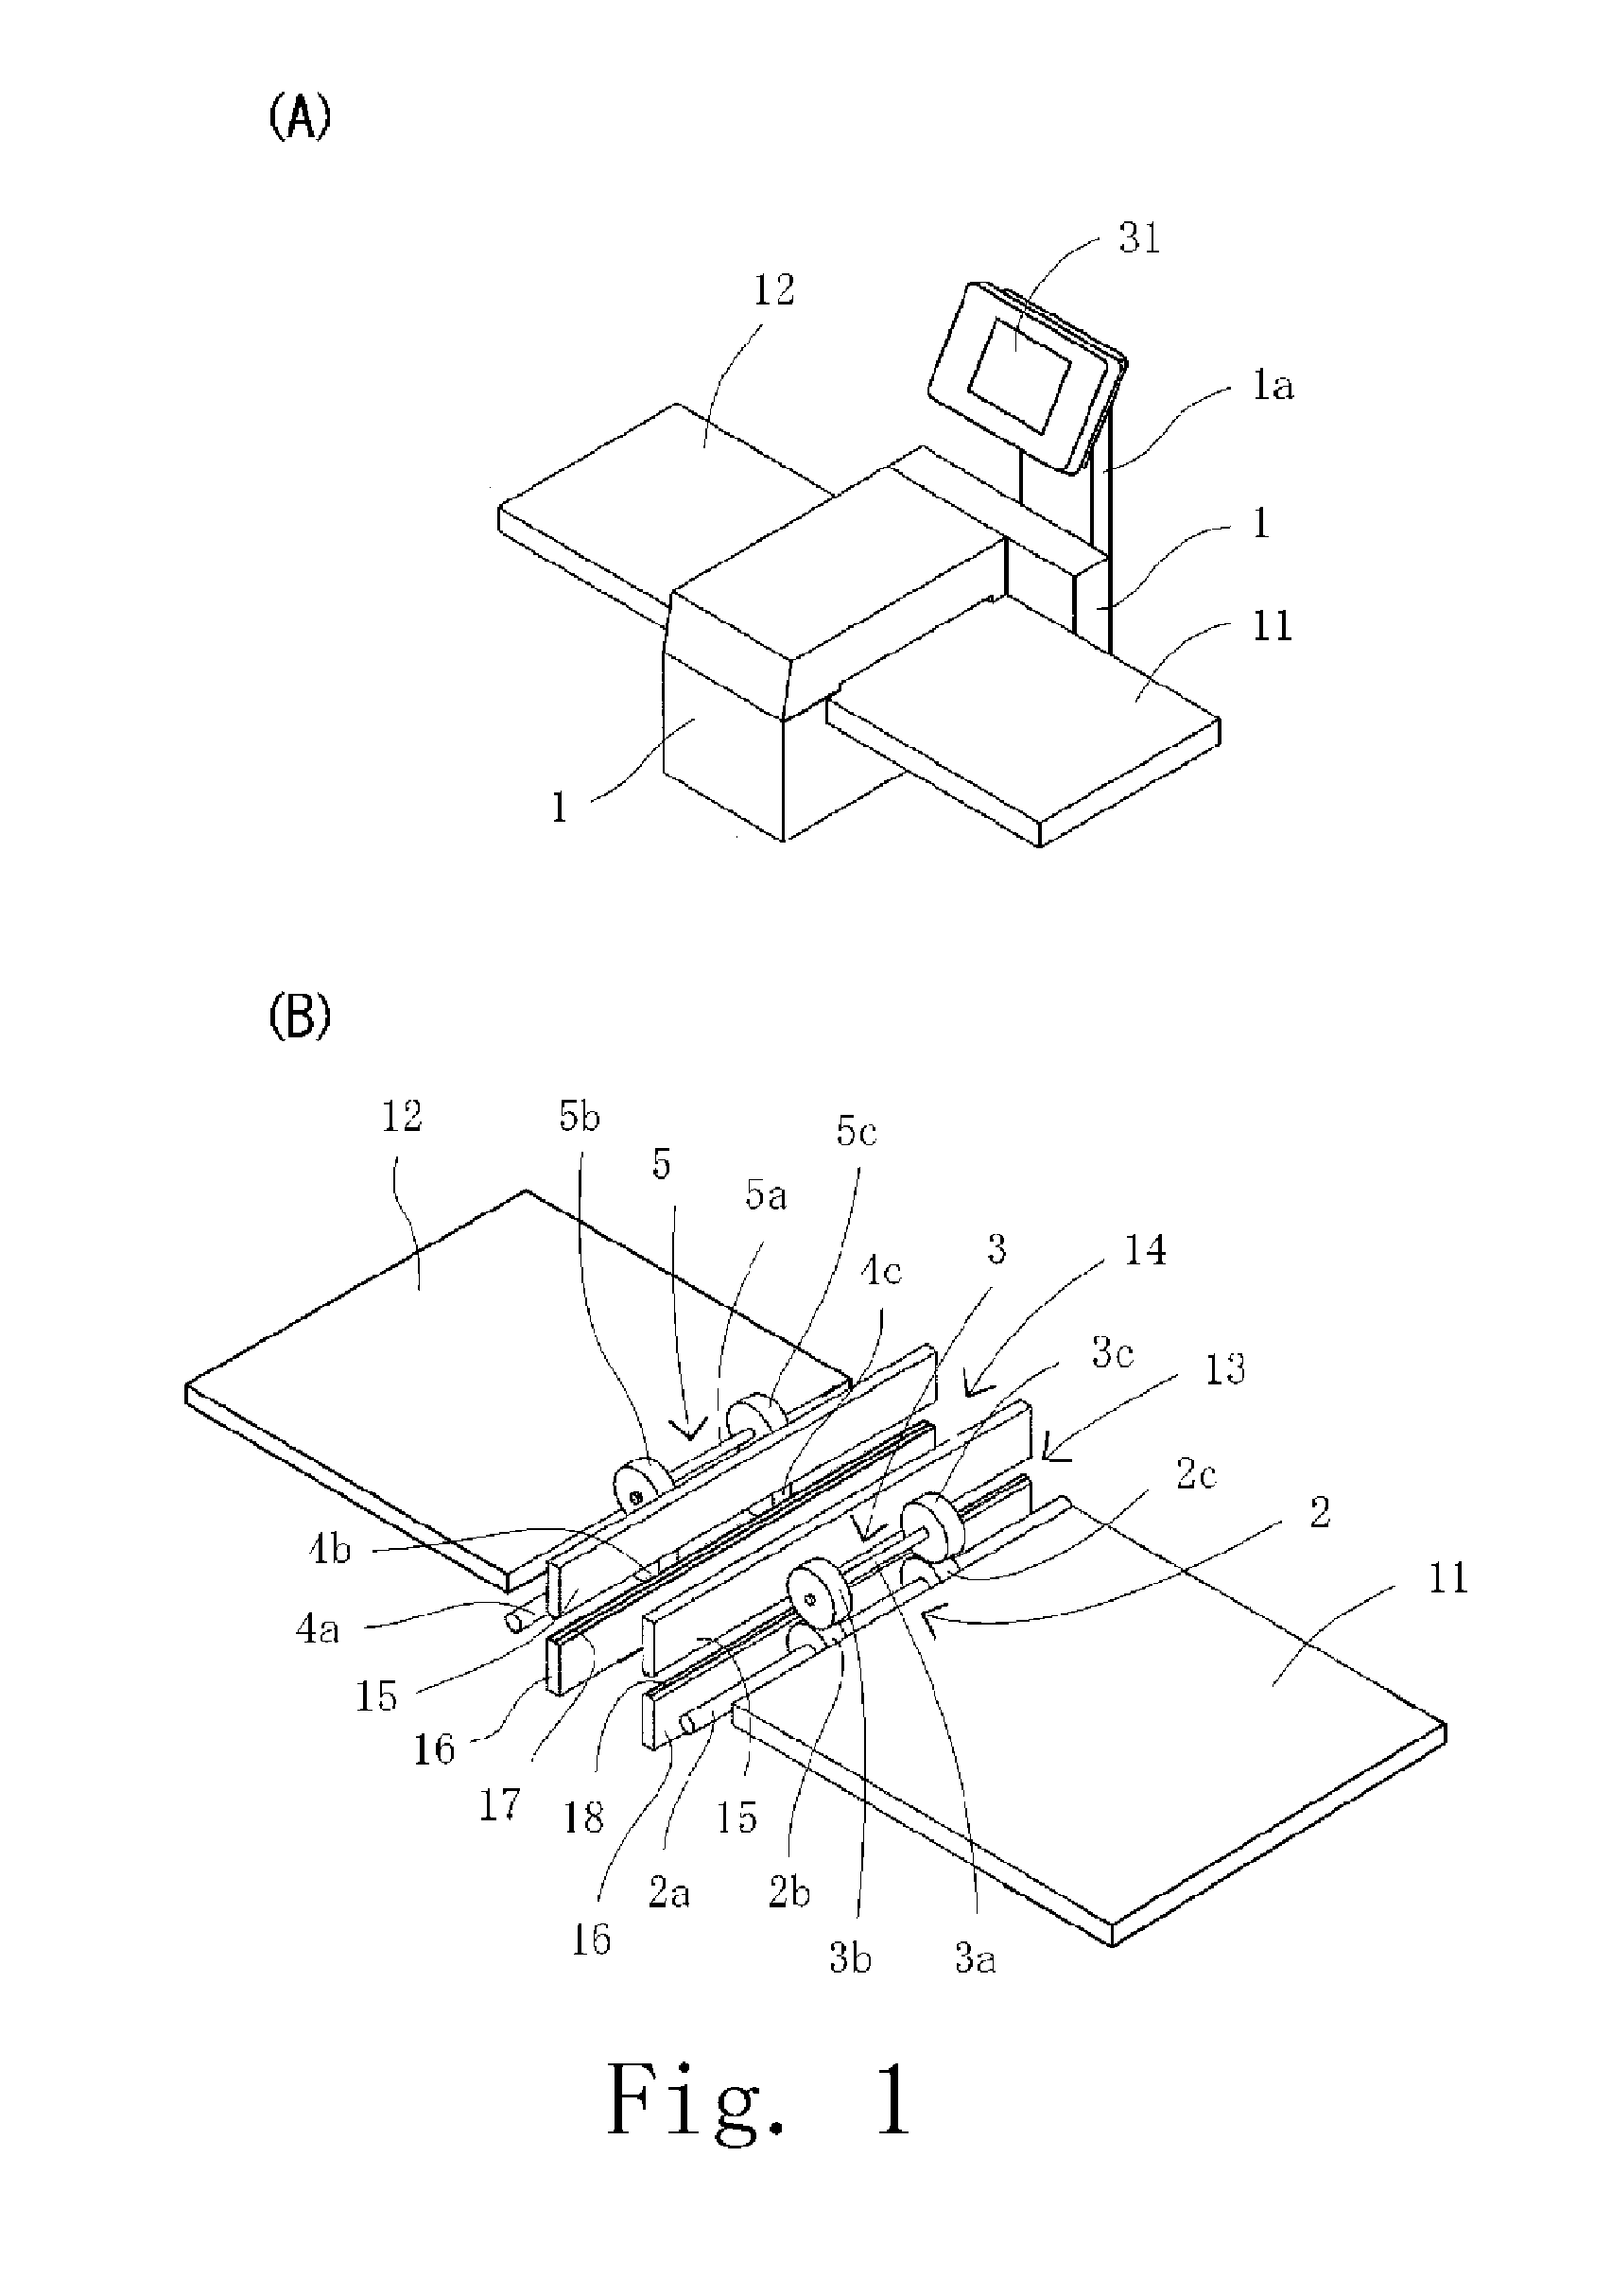 Machine for forming at least one crease on cover before attachment to book binding